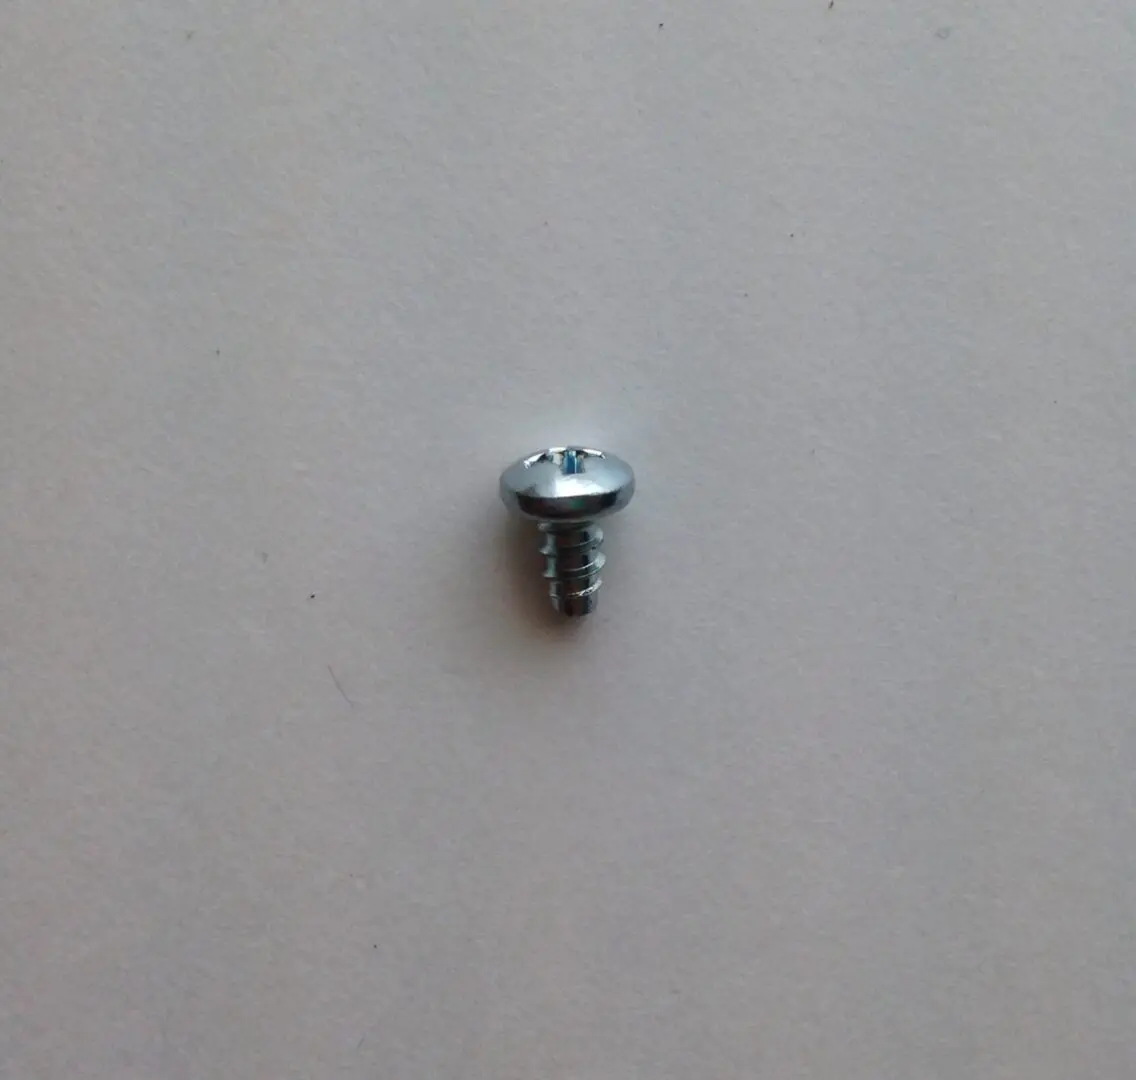 A close up of the screw on the wall